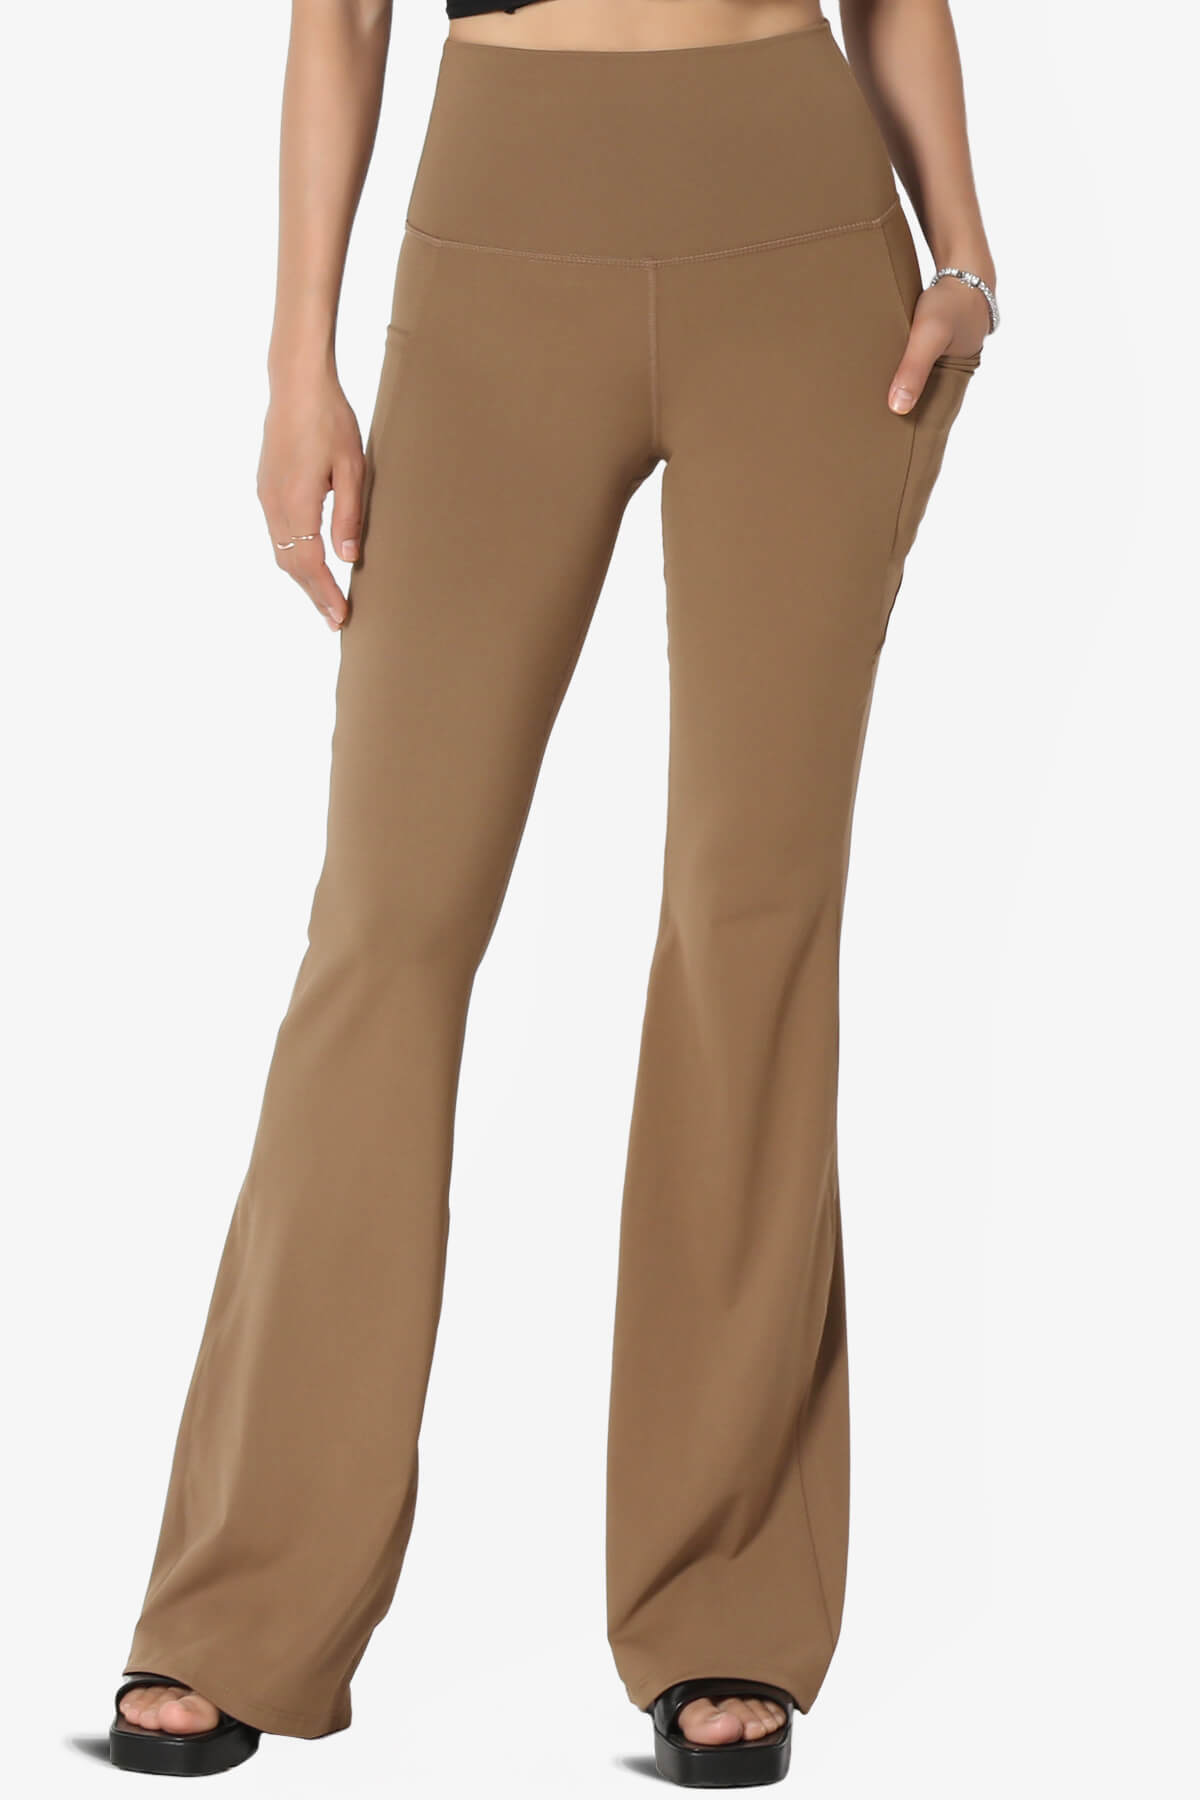 Load image into Gallery viewer, Gemma Athletic Pocket Flare Yoga Pants DEEP CAMEL_1
